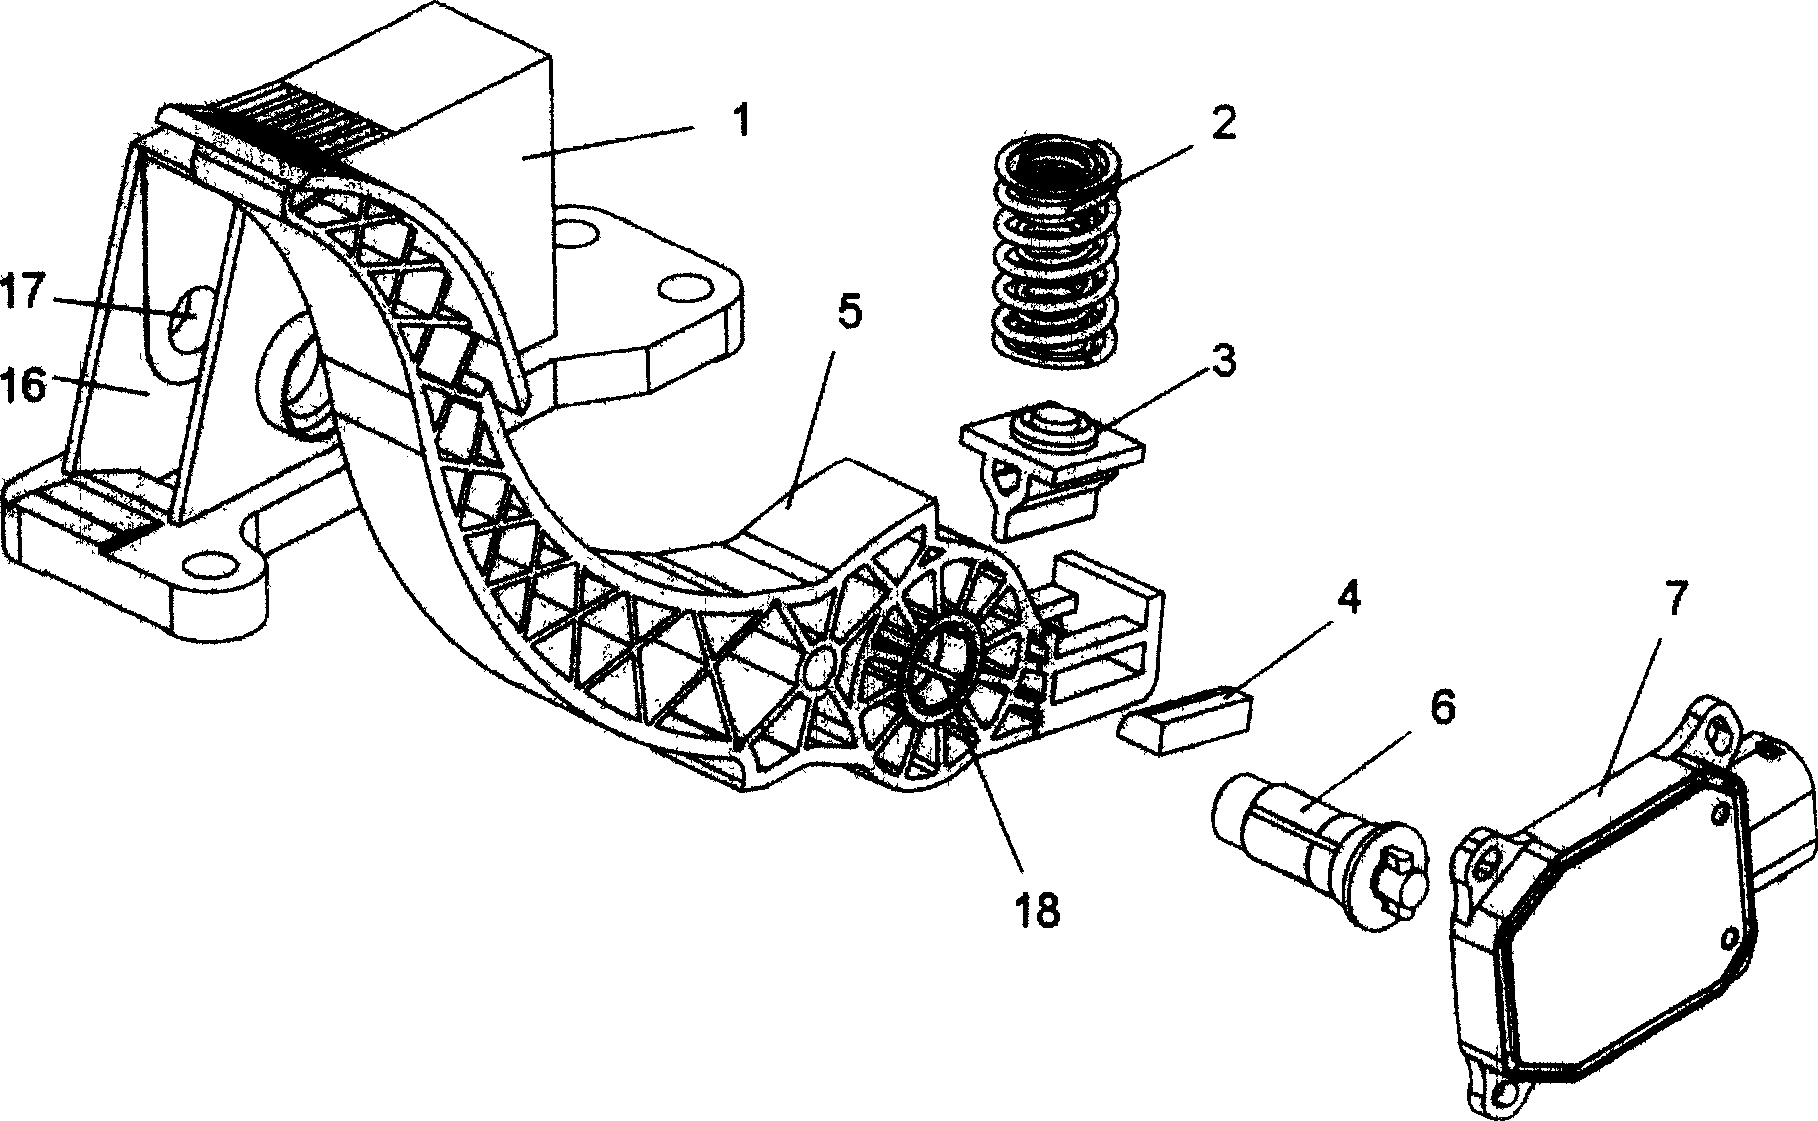 Electric accelerator pedal for vehicle